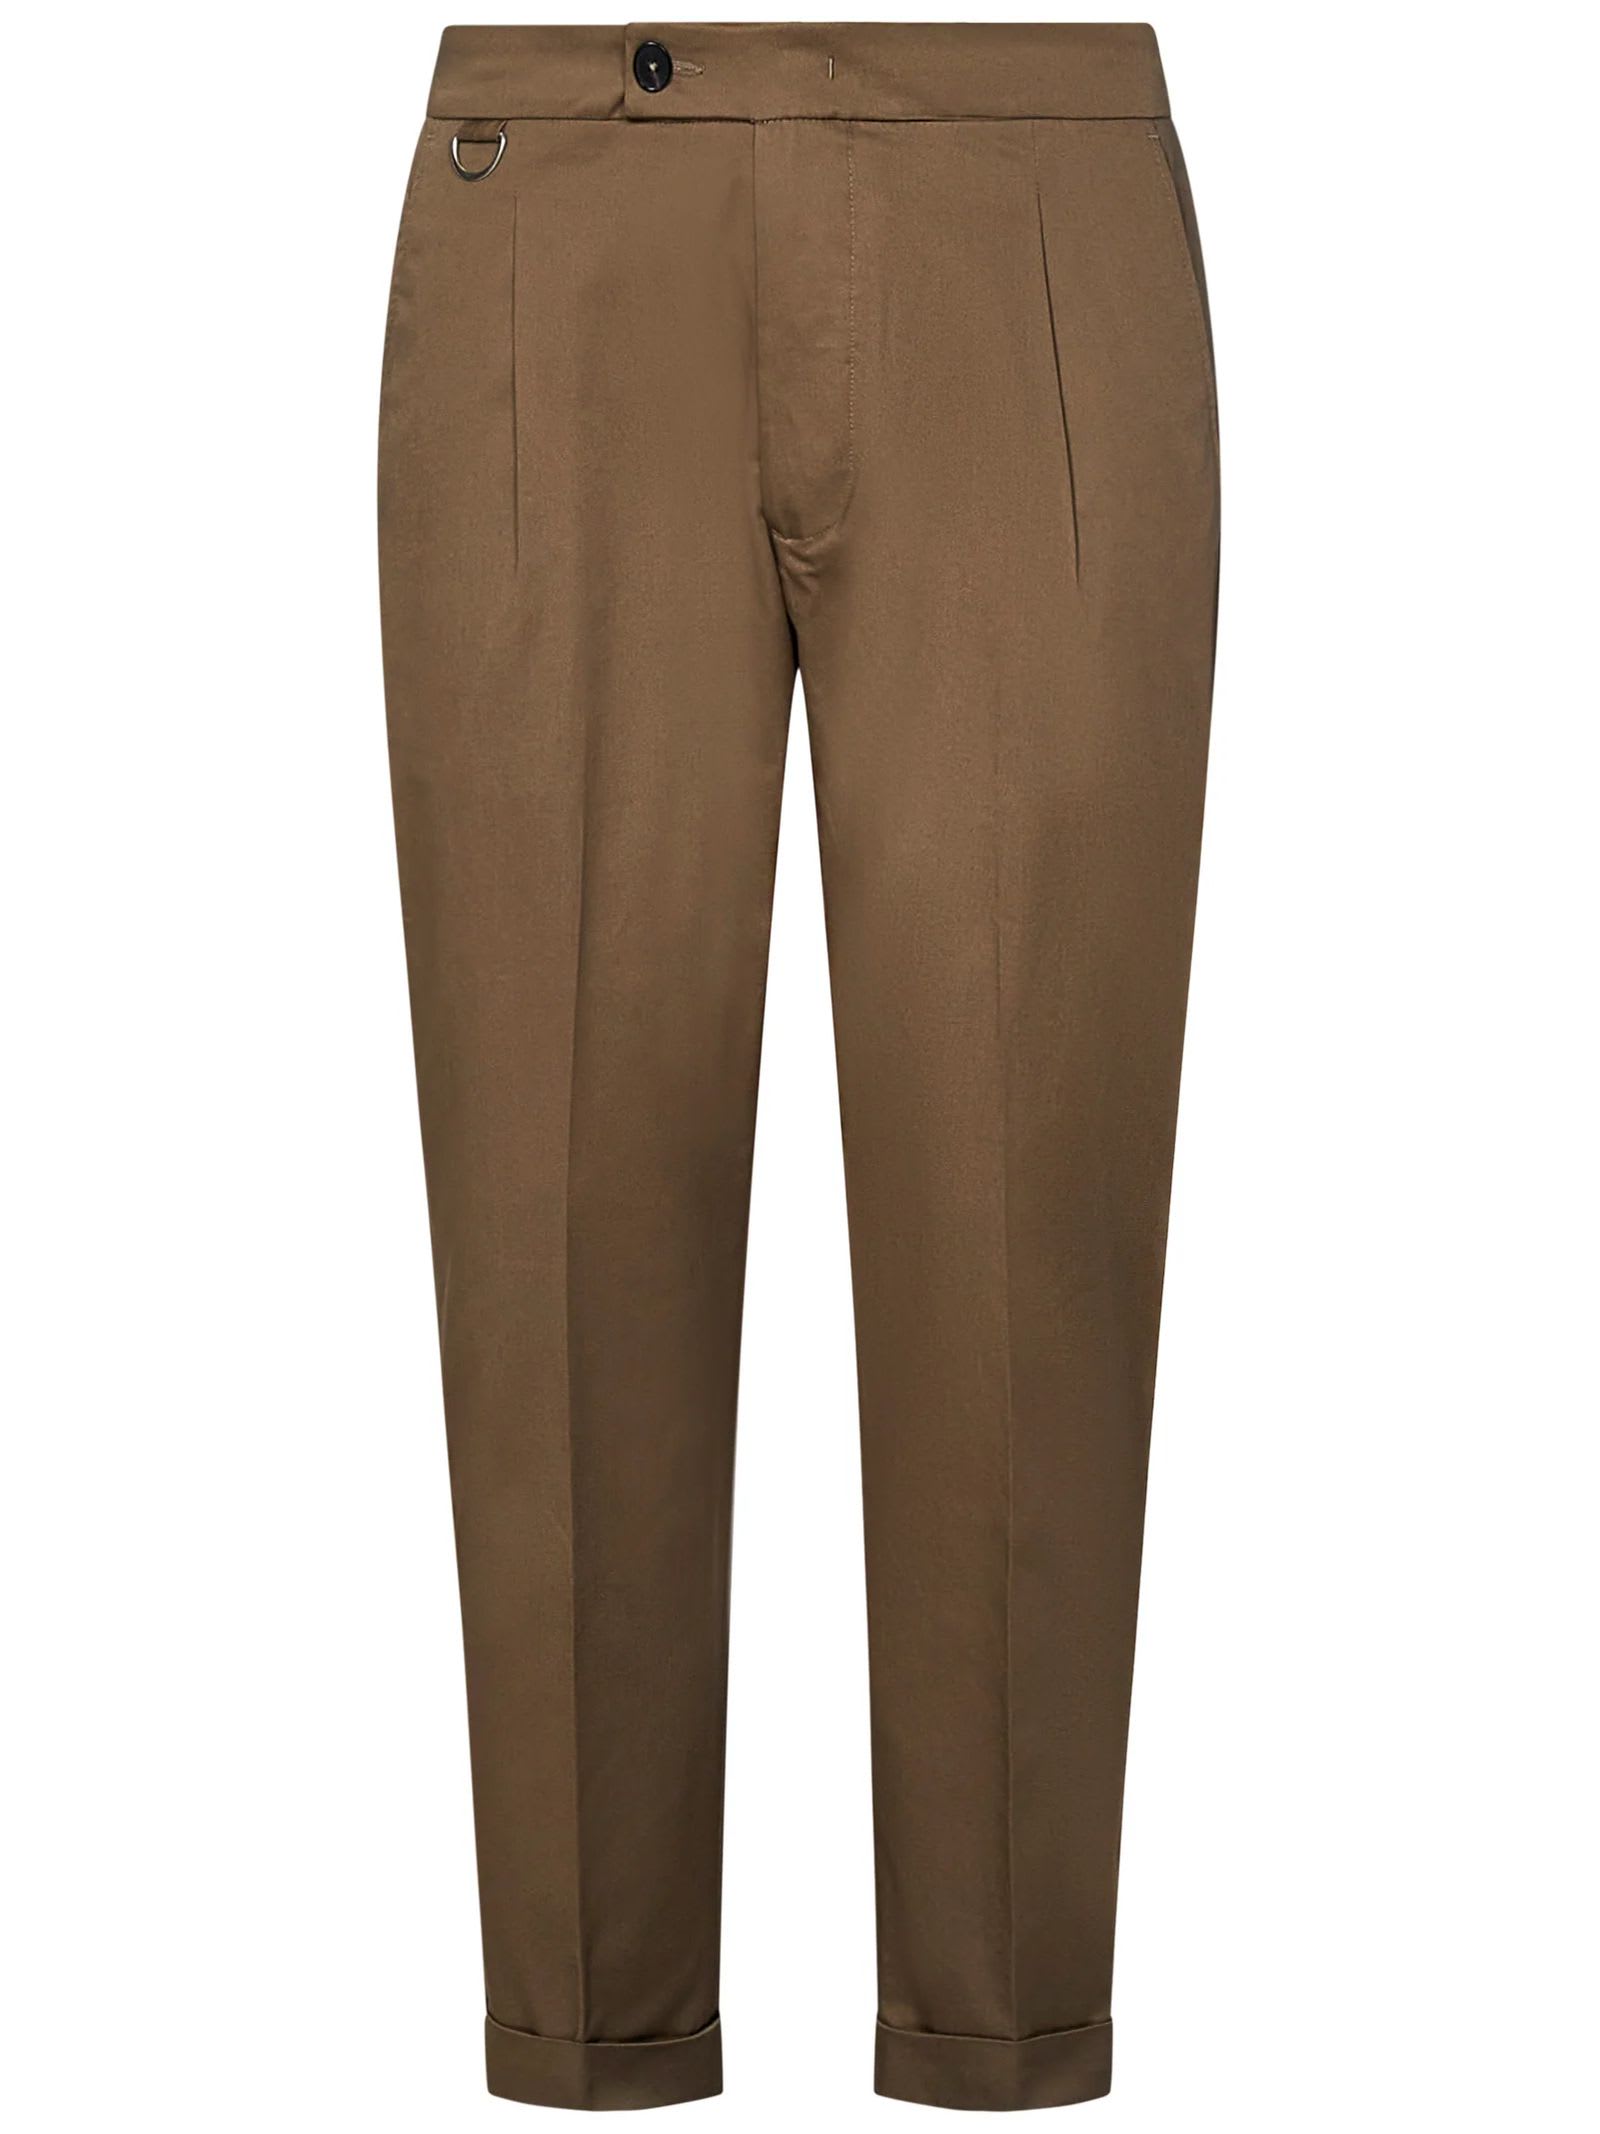 Shop Low Brand Trousers Brown